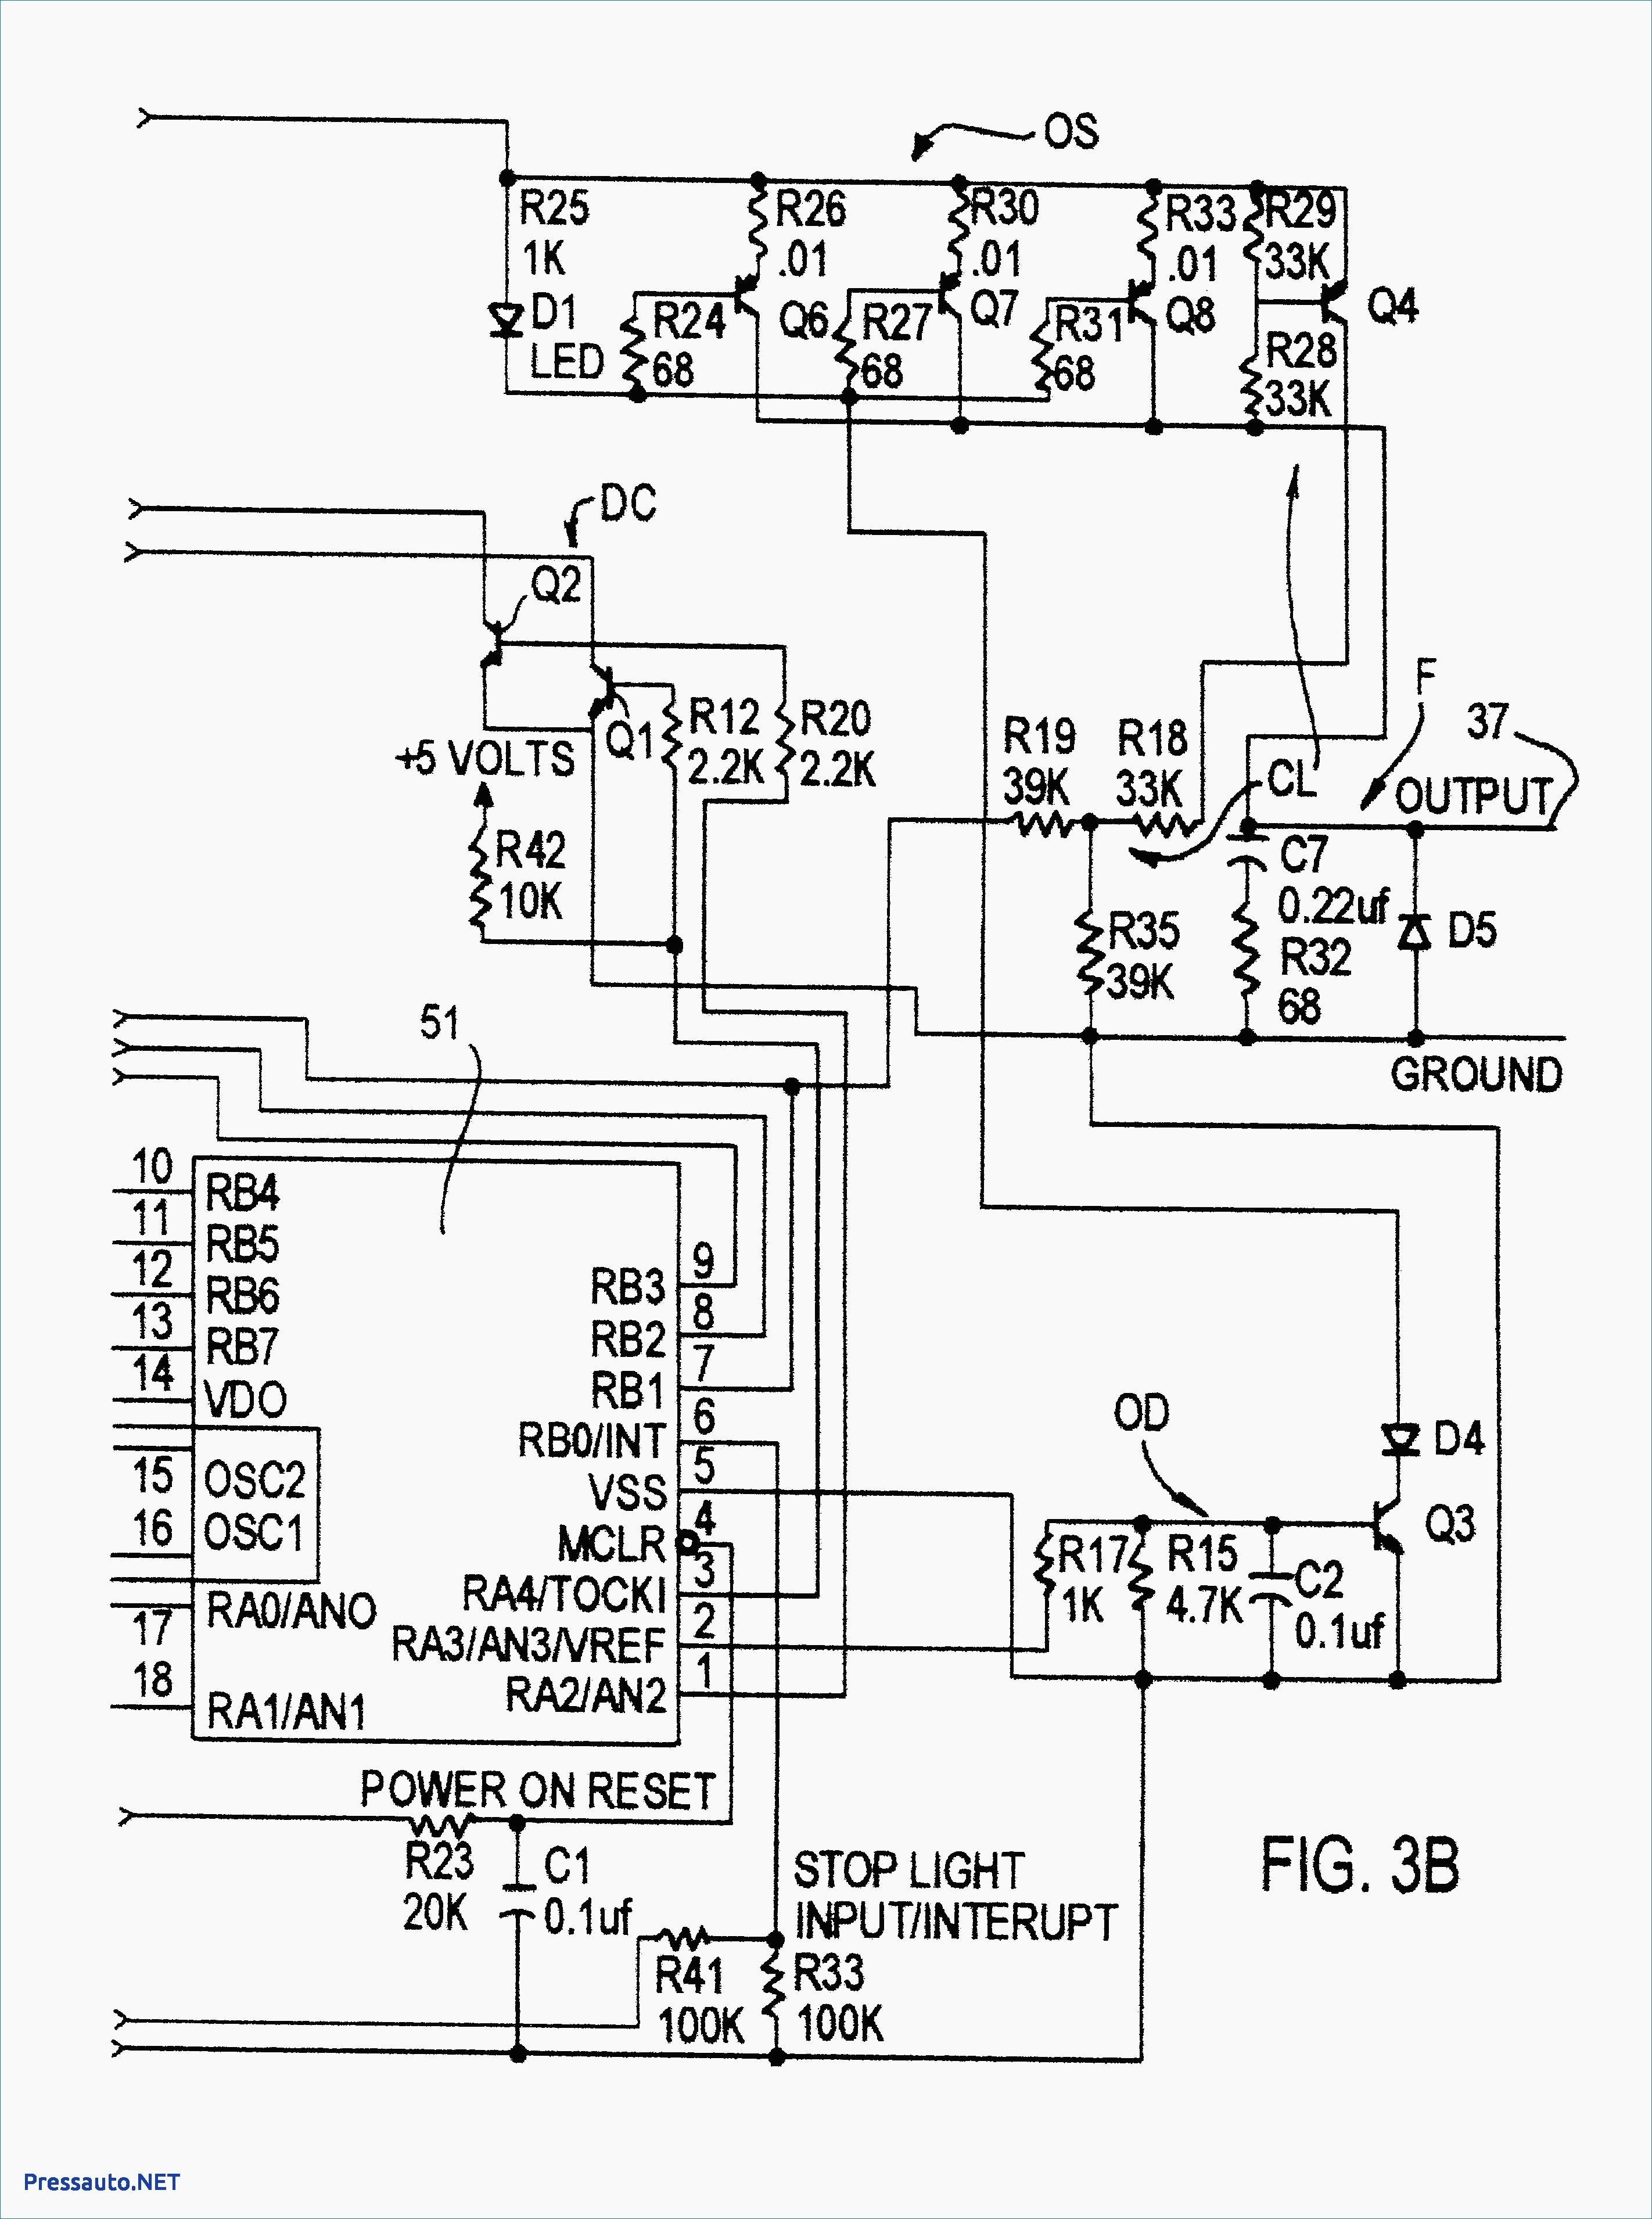 Outlet Wiring Diagram Gfci With Switch Diagrams Leviton Gfci Outlet Wiring Diagram Auto Diagrams